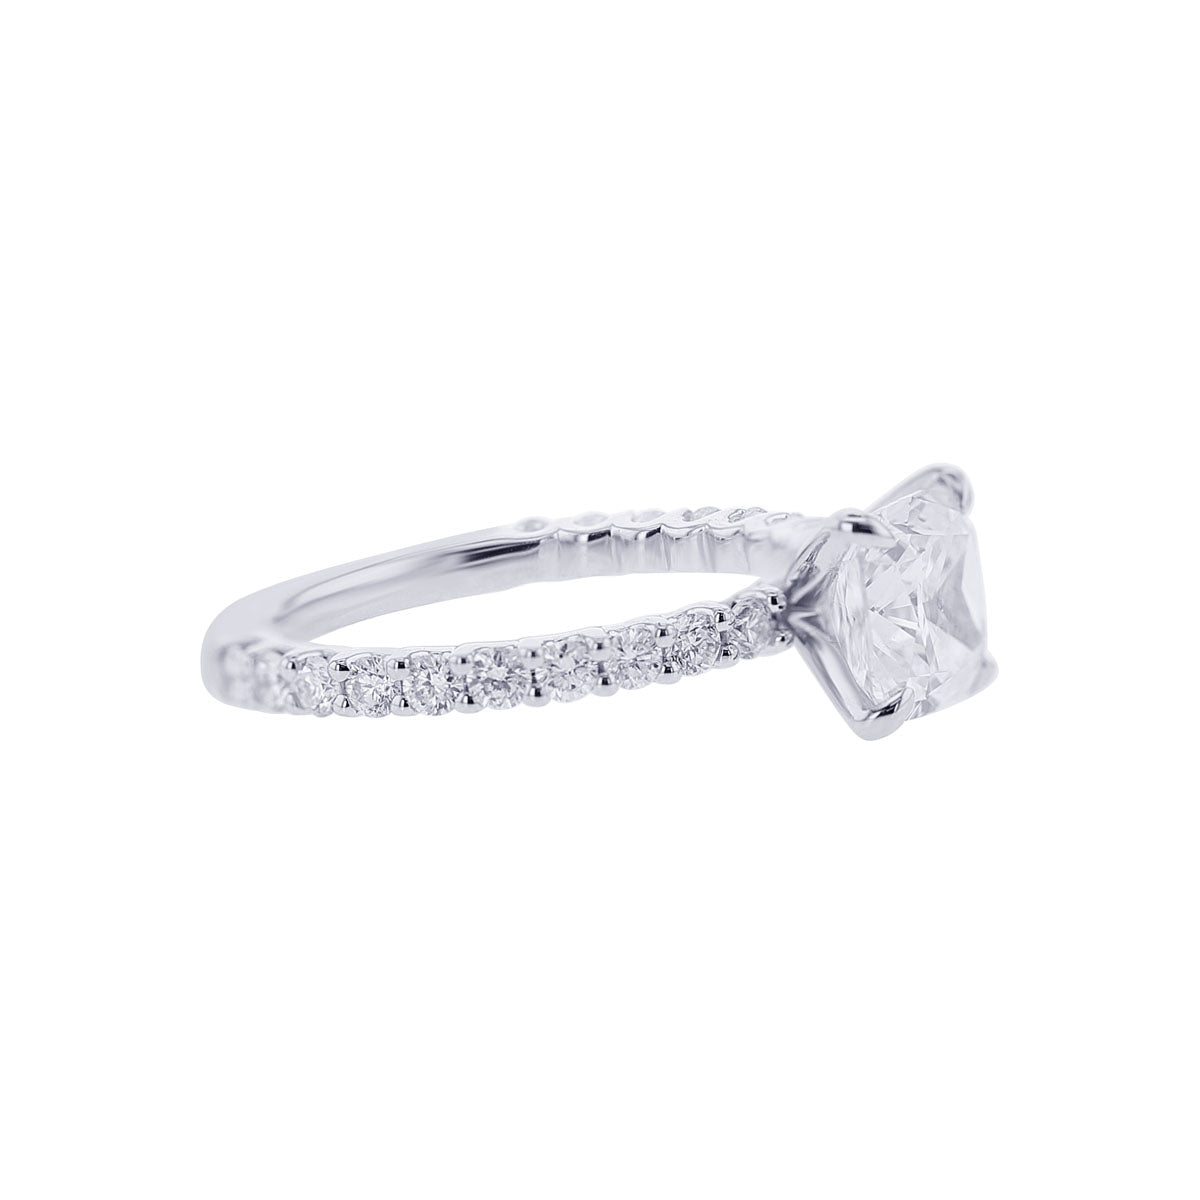 Emaline Certified Ready for Love Engagement Ring 2 1/3ct